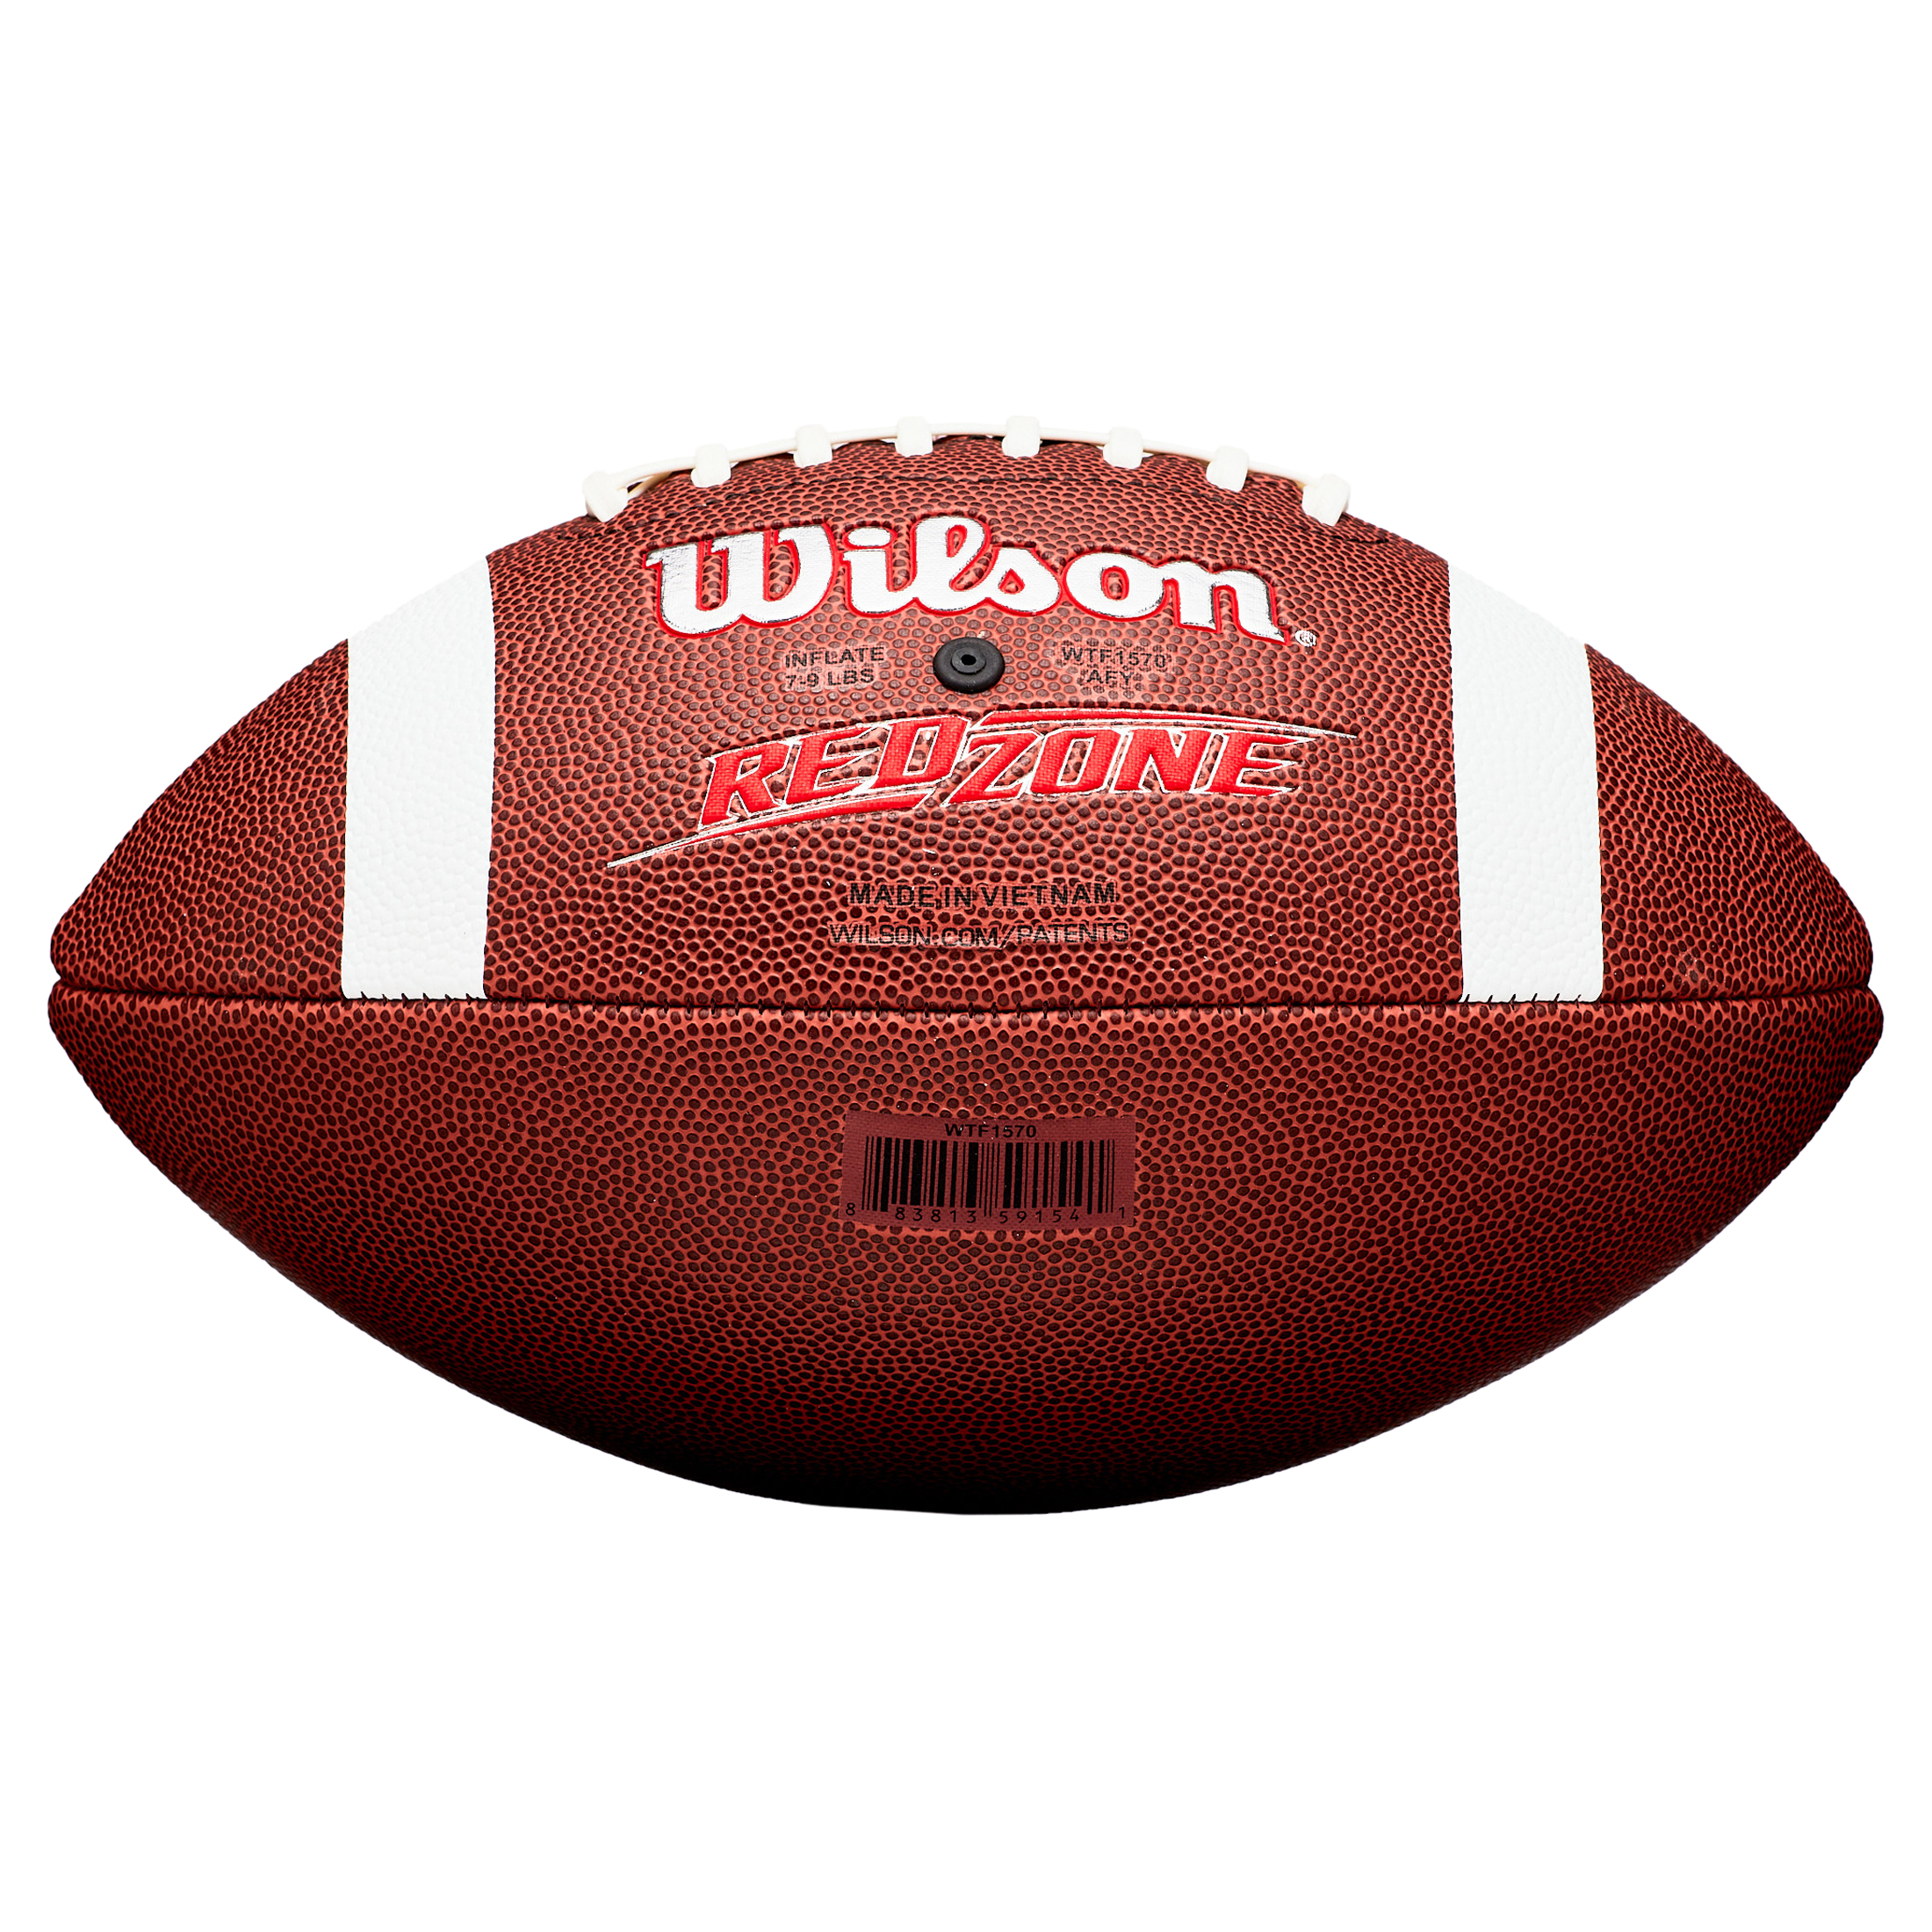 Wilson NCAA Red Zone Composite Football, Official Size (Ages 14 and up) - image 5 of 6